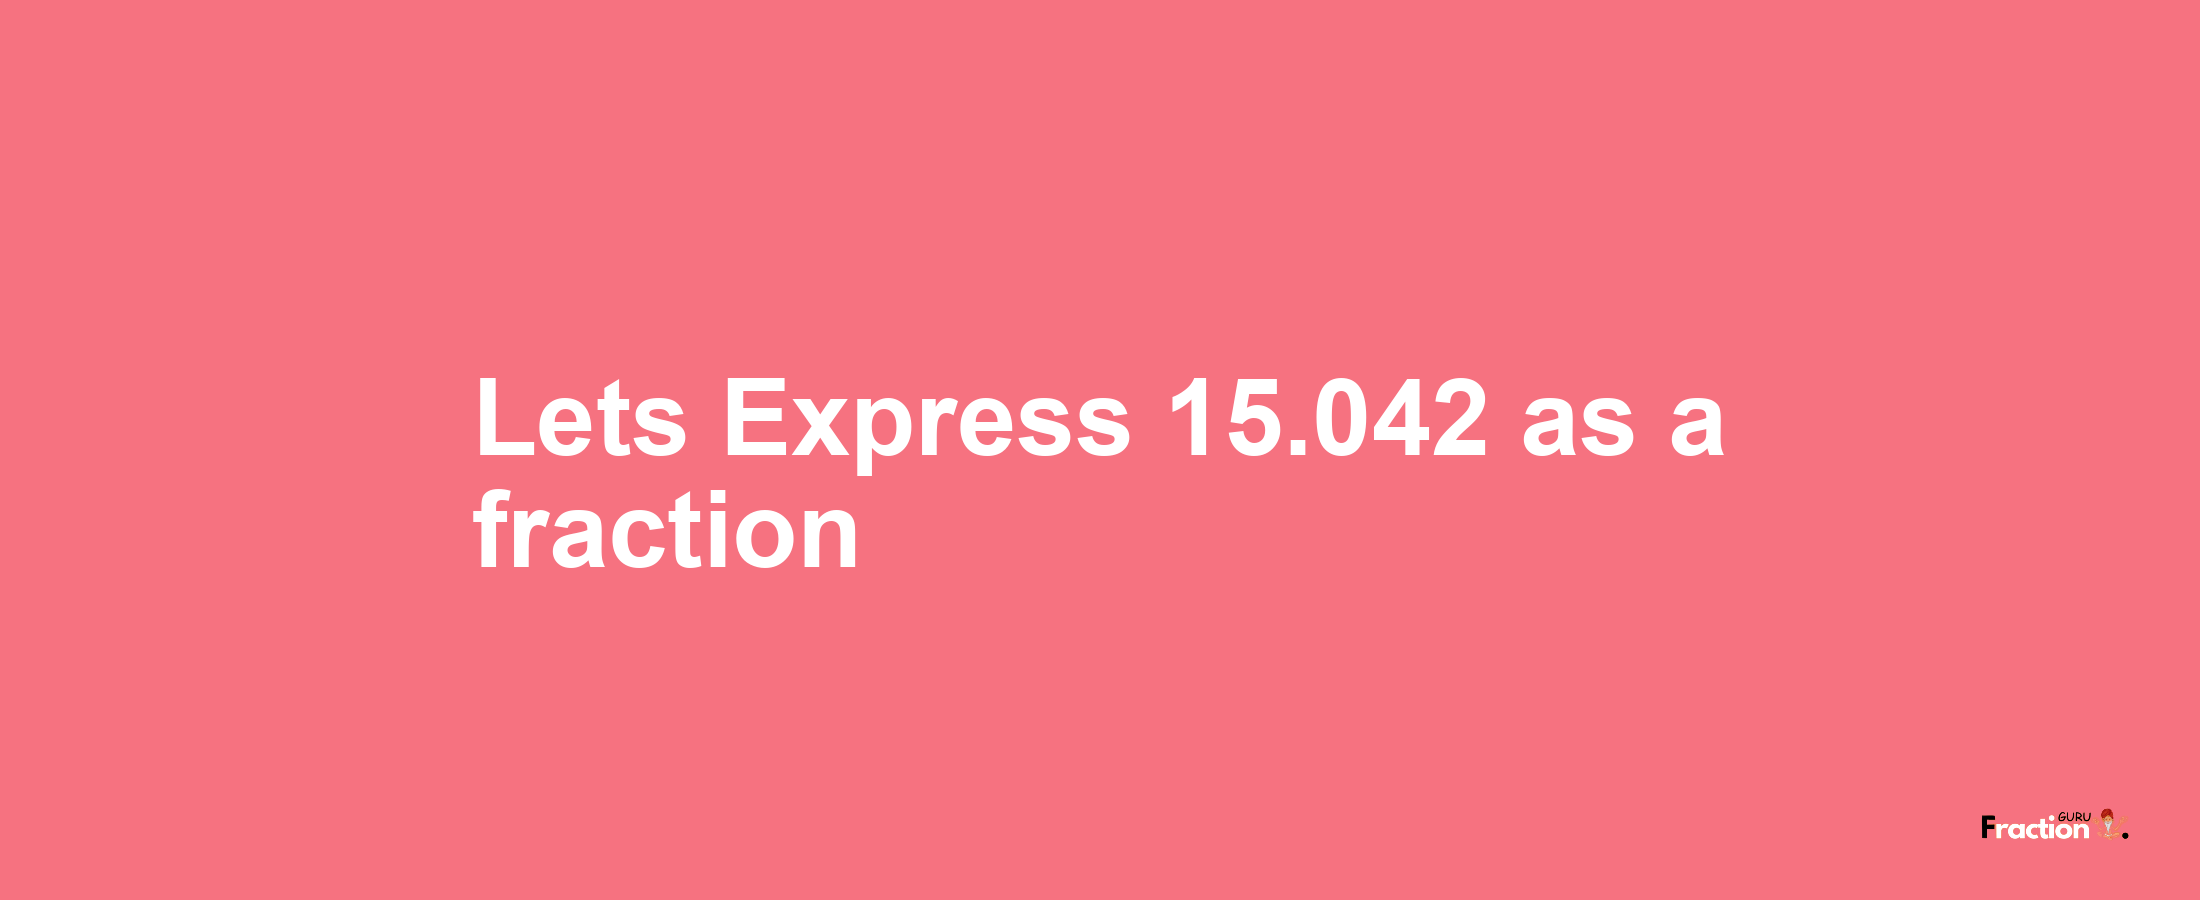 Lets Express 15.042 as afraction